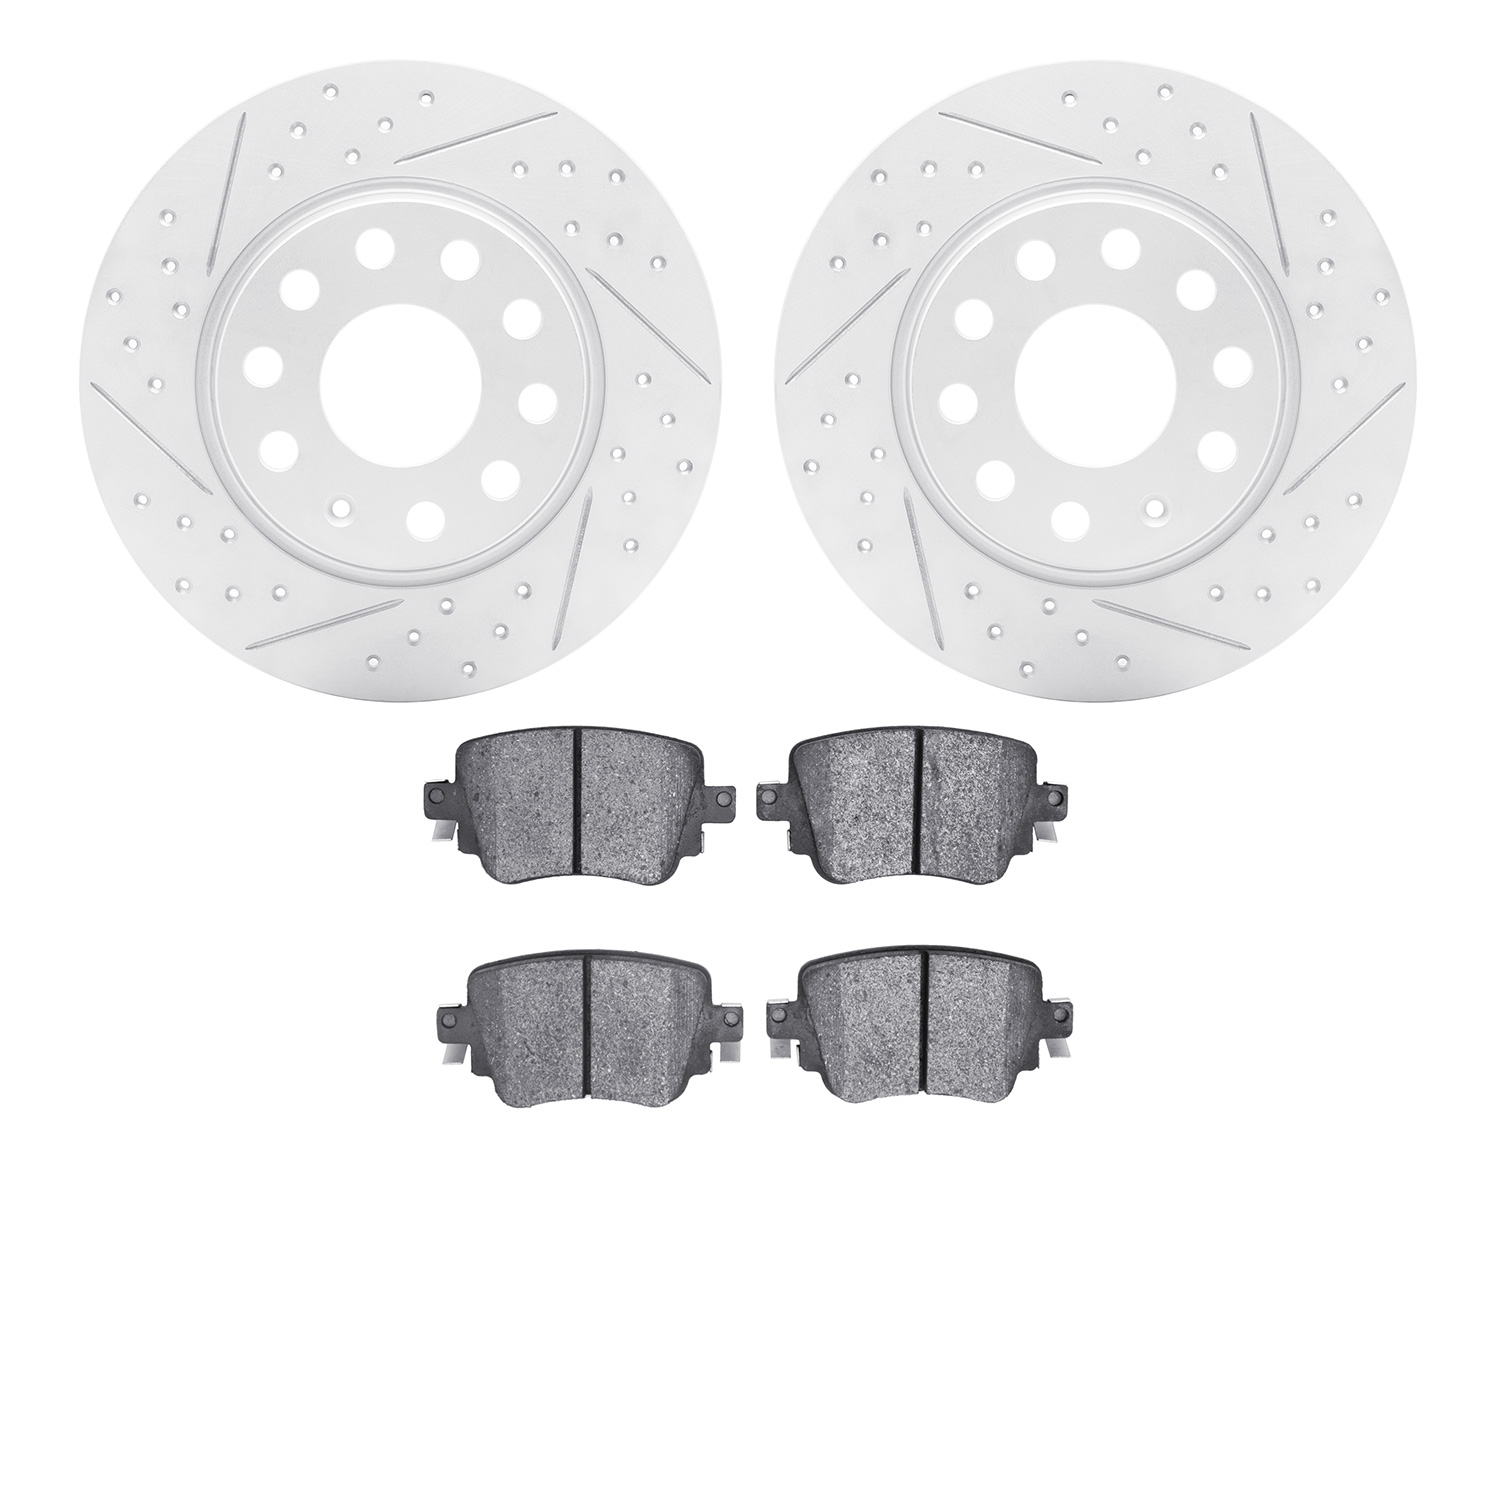 2502-74049 Geoperformance Drilled/Slotted Rotors w/5000 Advanced Brake Pads Kit, Fits Select Audi/Volkswagen, Position: Rear